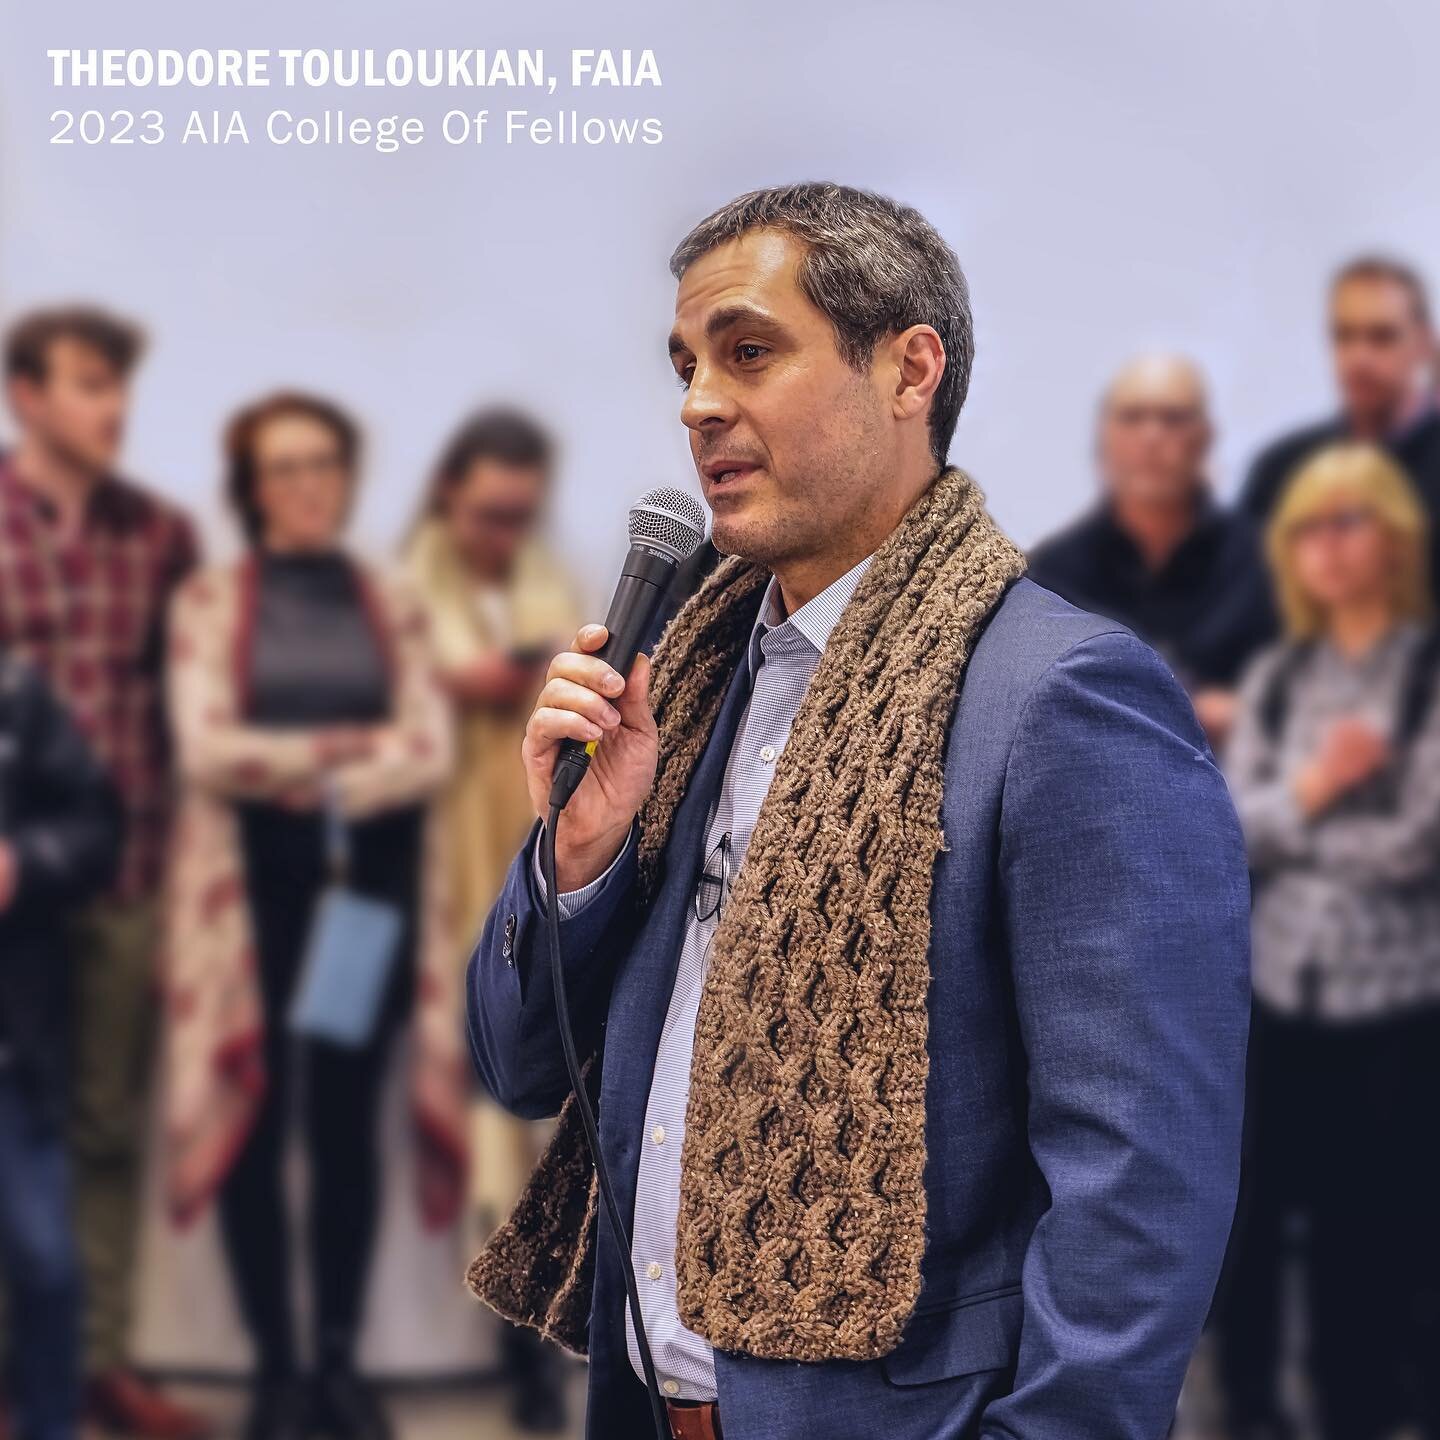 Our president and founder, Ted Touloukian, has been elevated to the AIA College of Fellows! Earning his fellowship under Object One, the AIA celebrates architects who &ldquo;promote the aesthetic, scientific, and practical efficiency of the professio